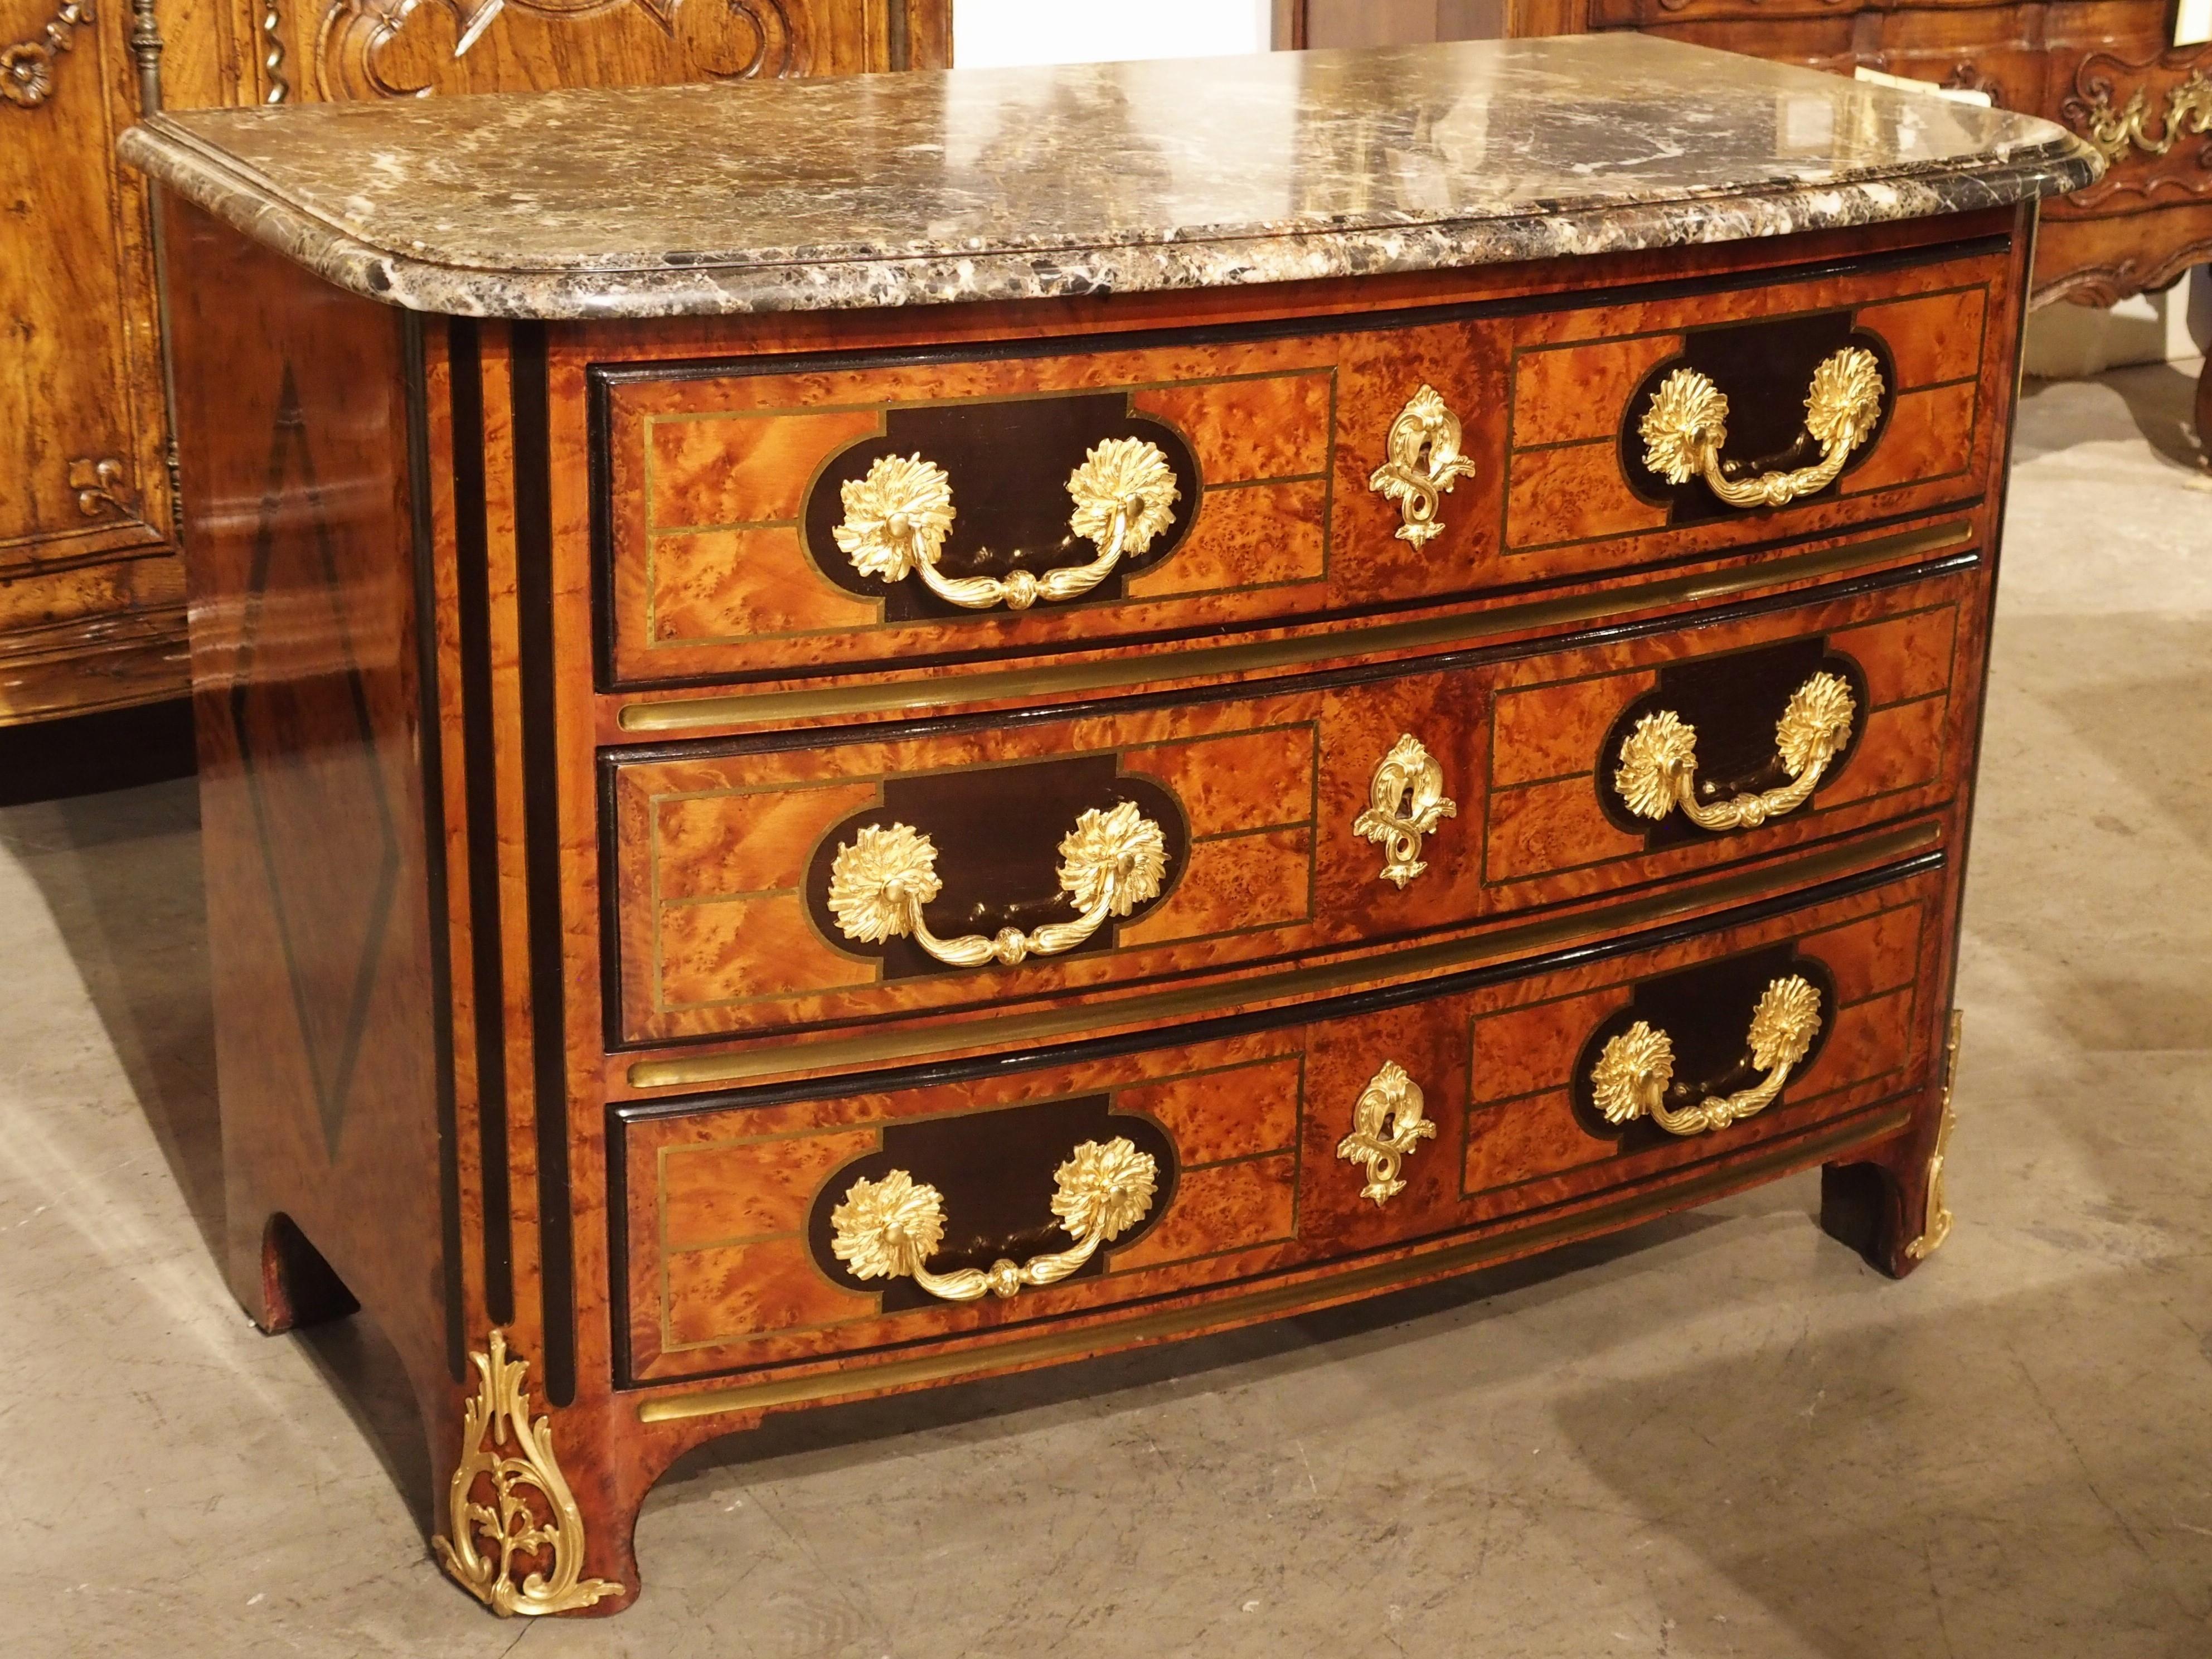 This rich, French commode, or chest of drawers, is a late 19th century production from a high quality ebenisterie in Paris.  The fire stamp (makers mark) on the rear left of the piece reads “BR A PARIS”.  This firm was likely situated in the